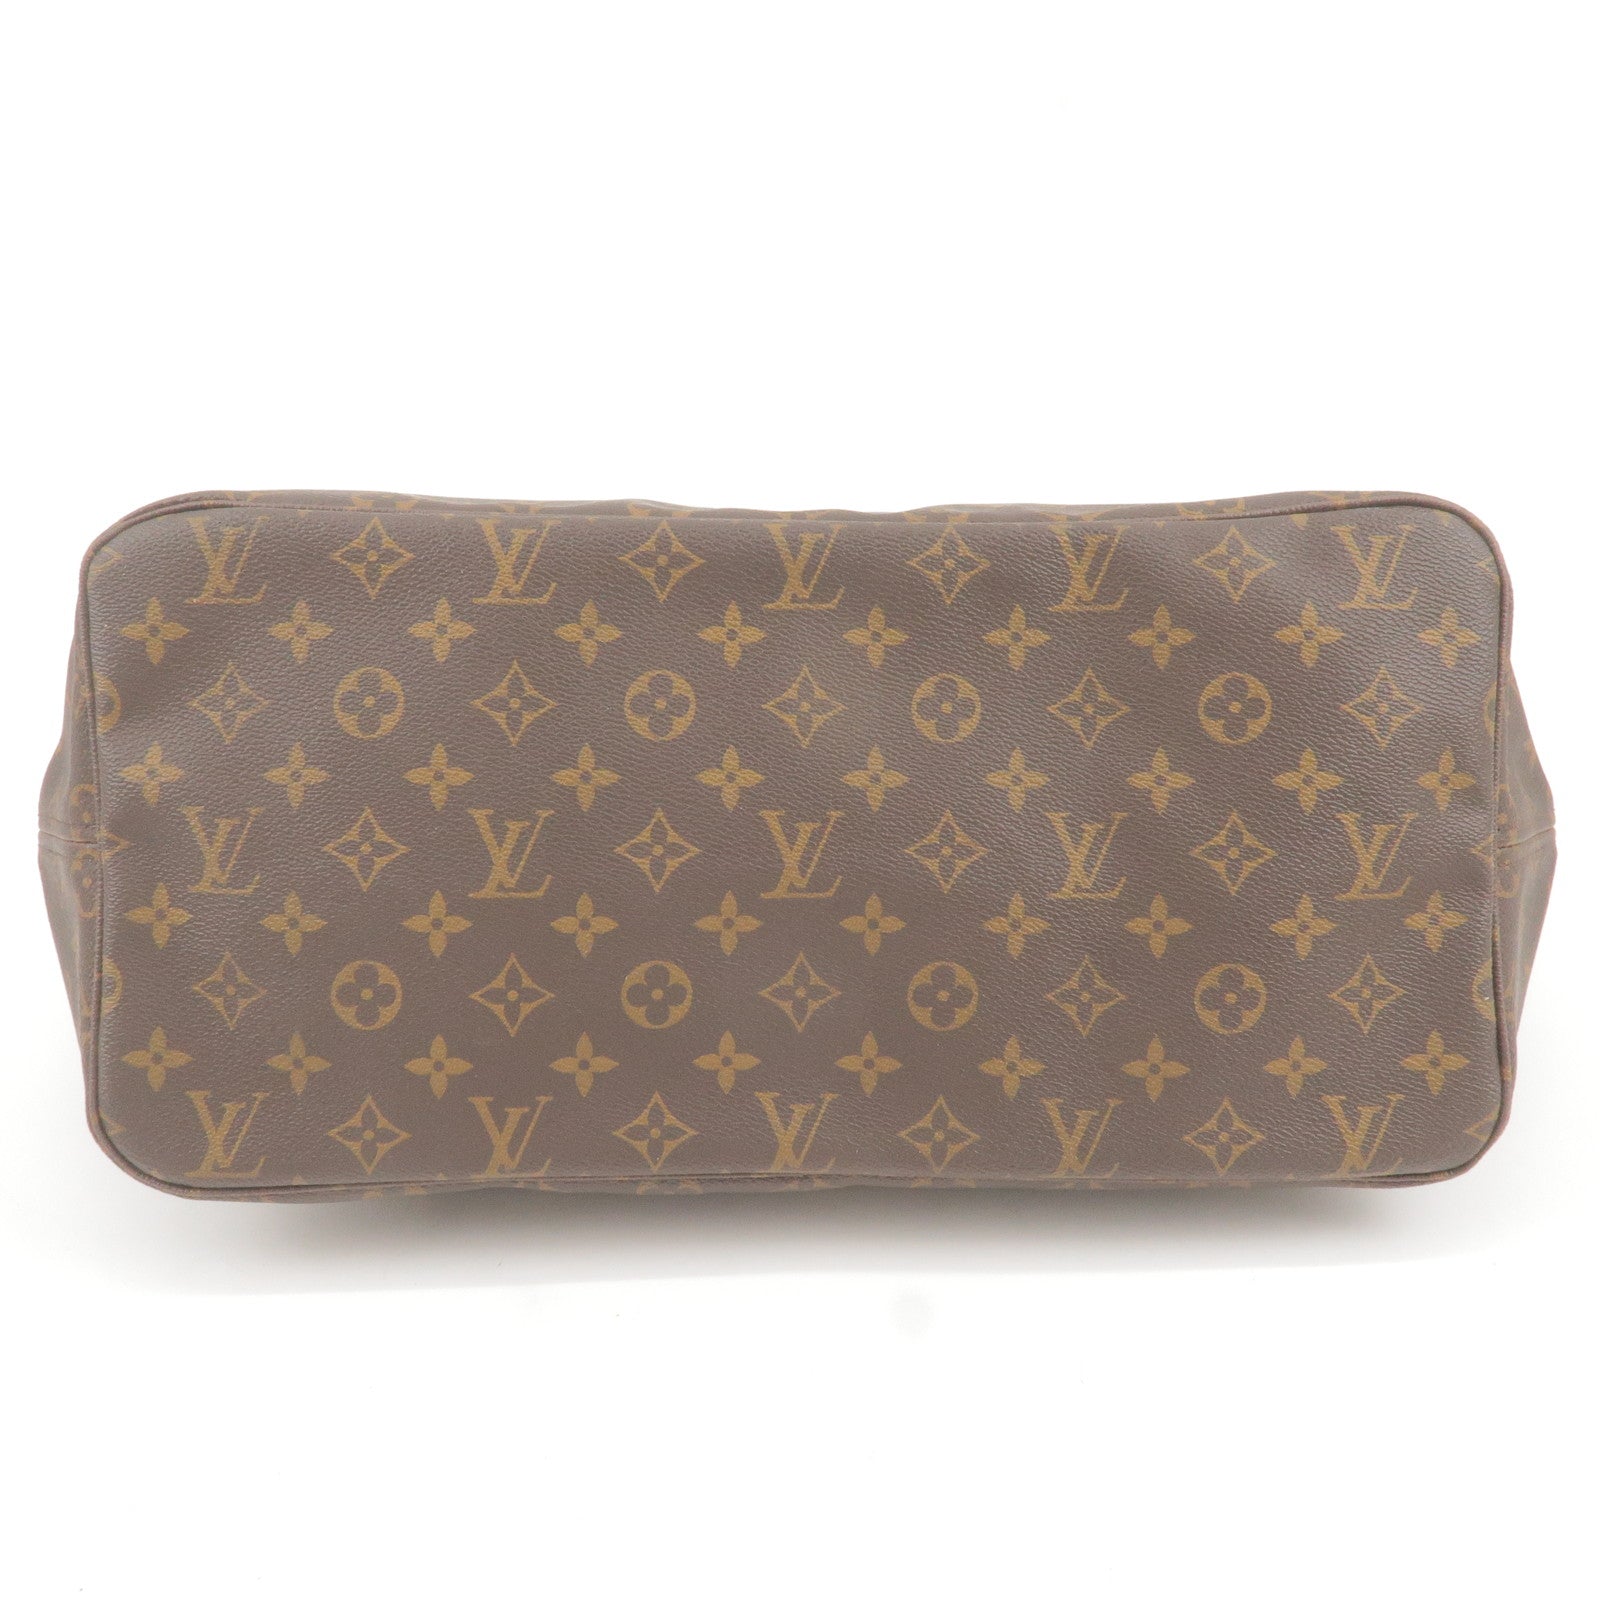 Louis Vuitton Neverfull GM M40157 Monogram Canvas Tote. With small Initials